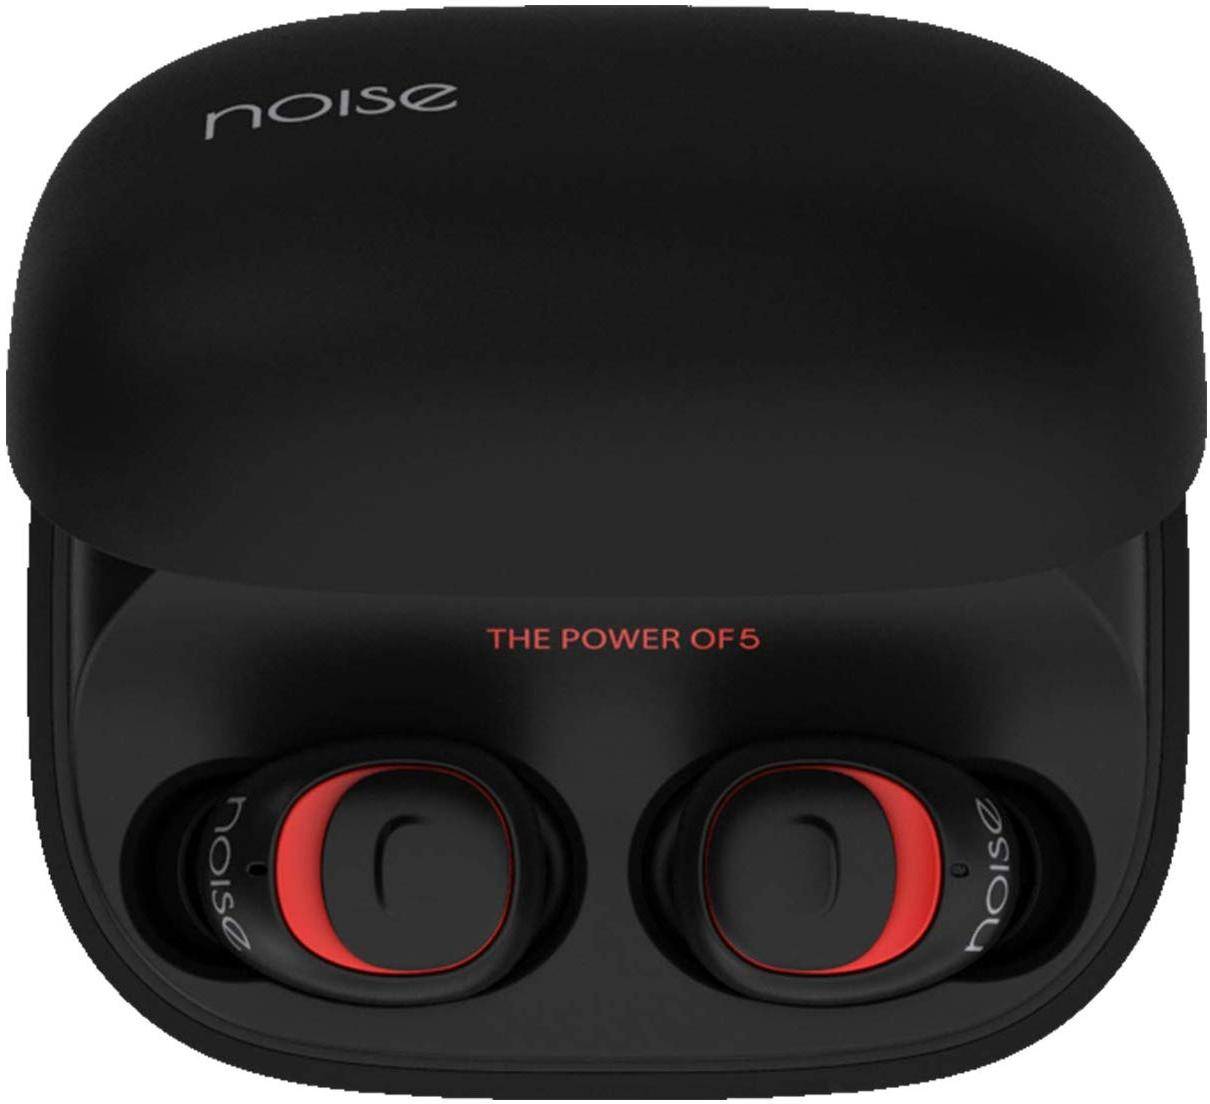 Noise Shots X5 CHARGE Truly Wireless Bluetooth Earbuds Earphones with Charging Case zoom image